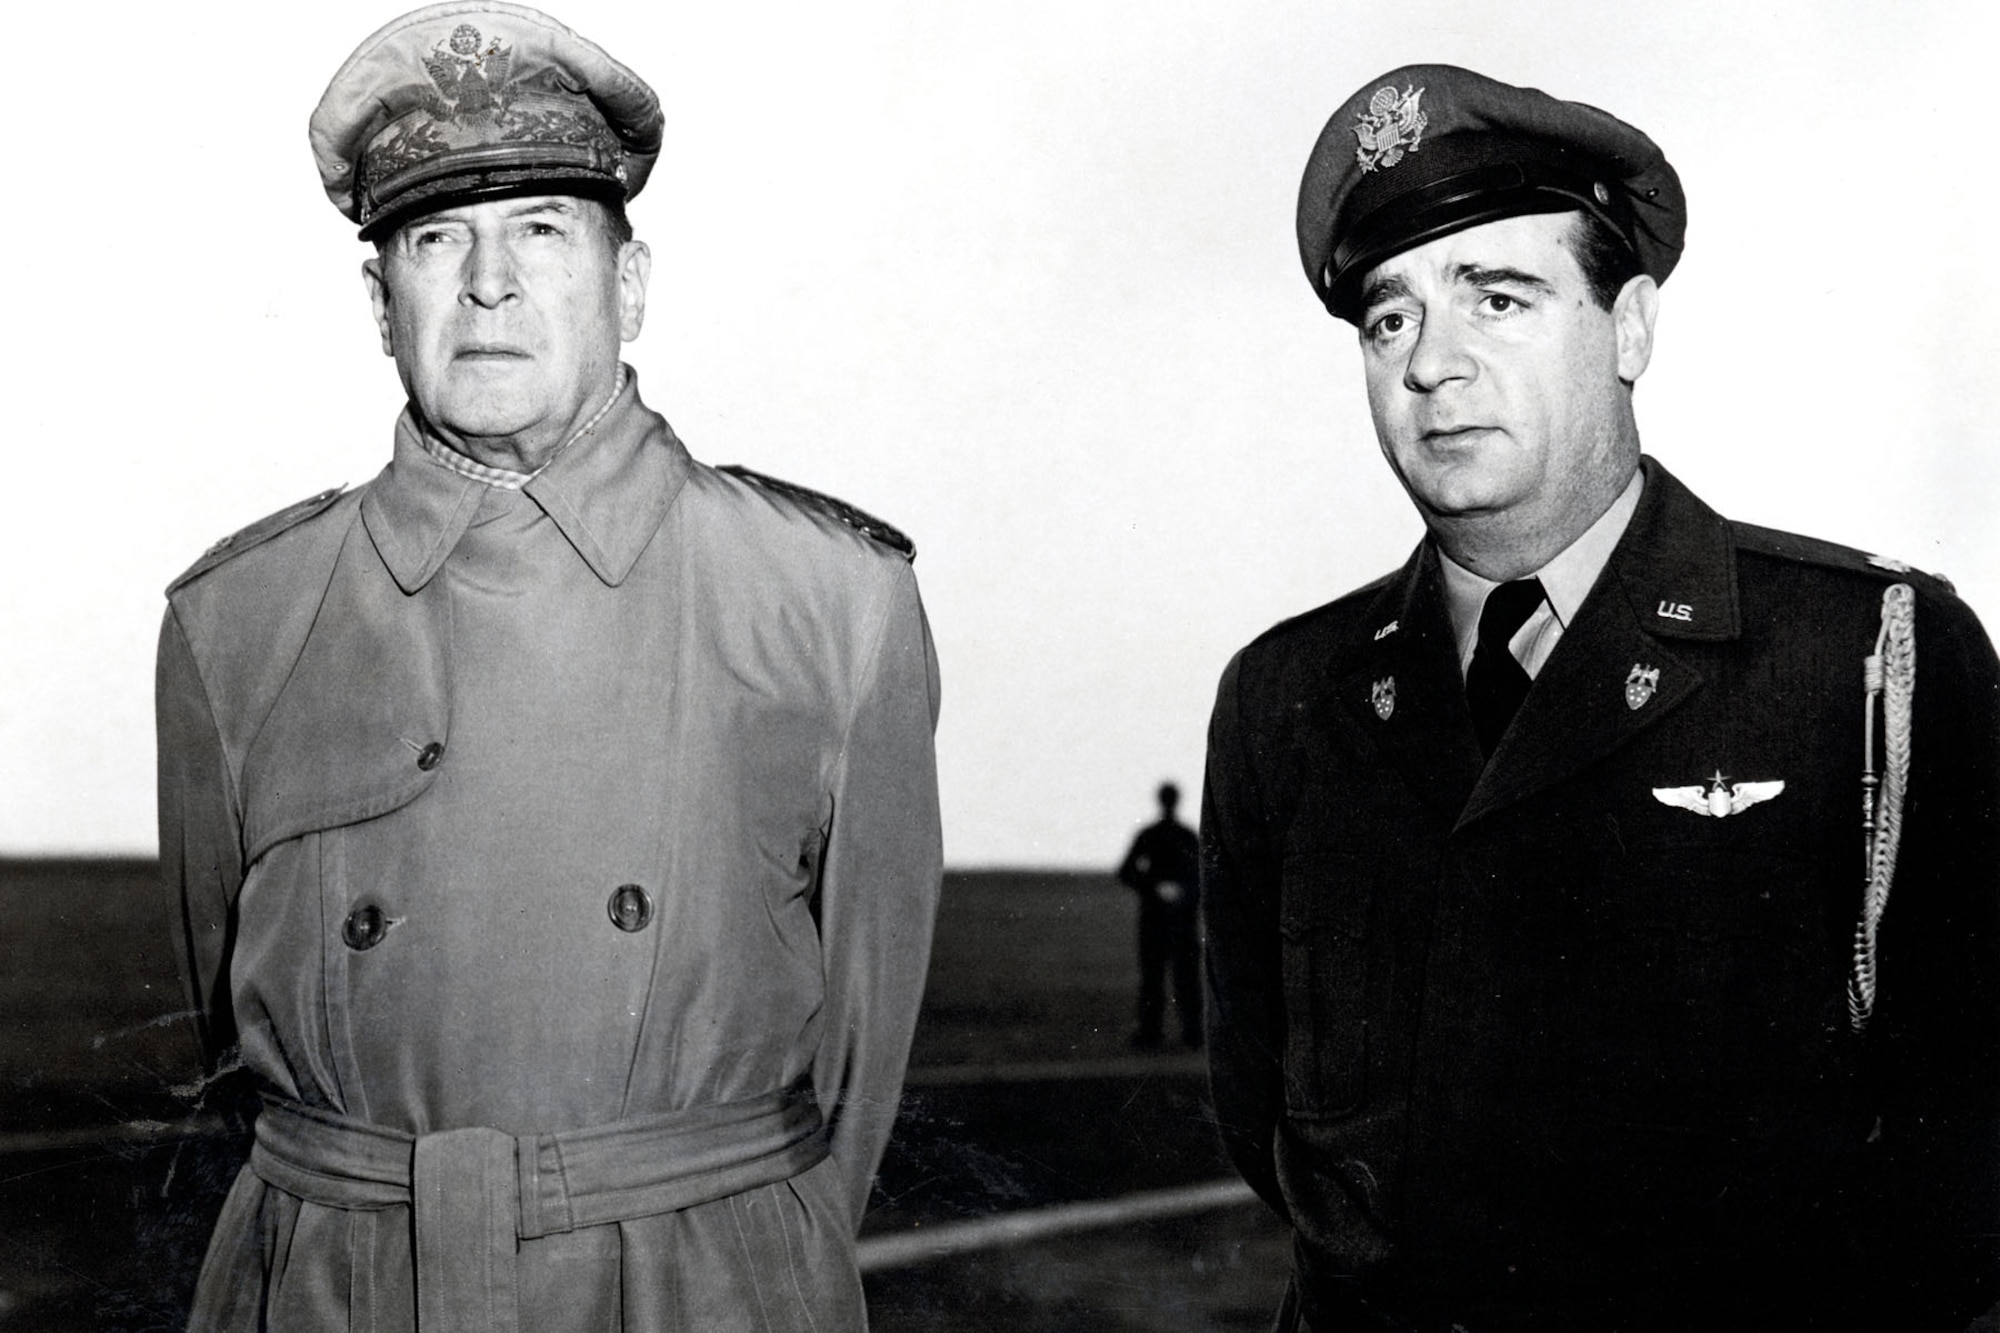 Gen. Douglas MacArthur, World War II hero and first UN commander in Korea, with his pilot, Lt. Col. Anthony Storey. Combat Cargo transported VIPs as well as supplies and troops. (U.S. Air Force photo)